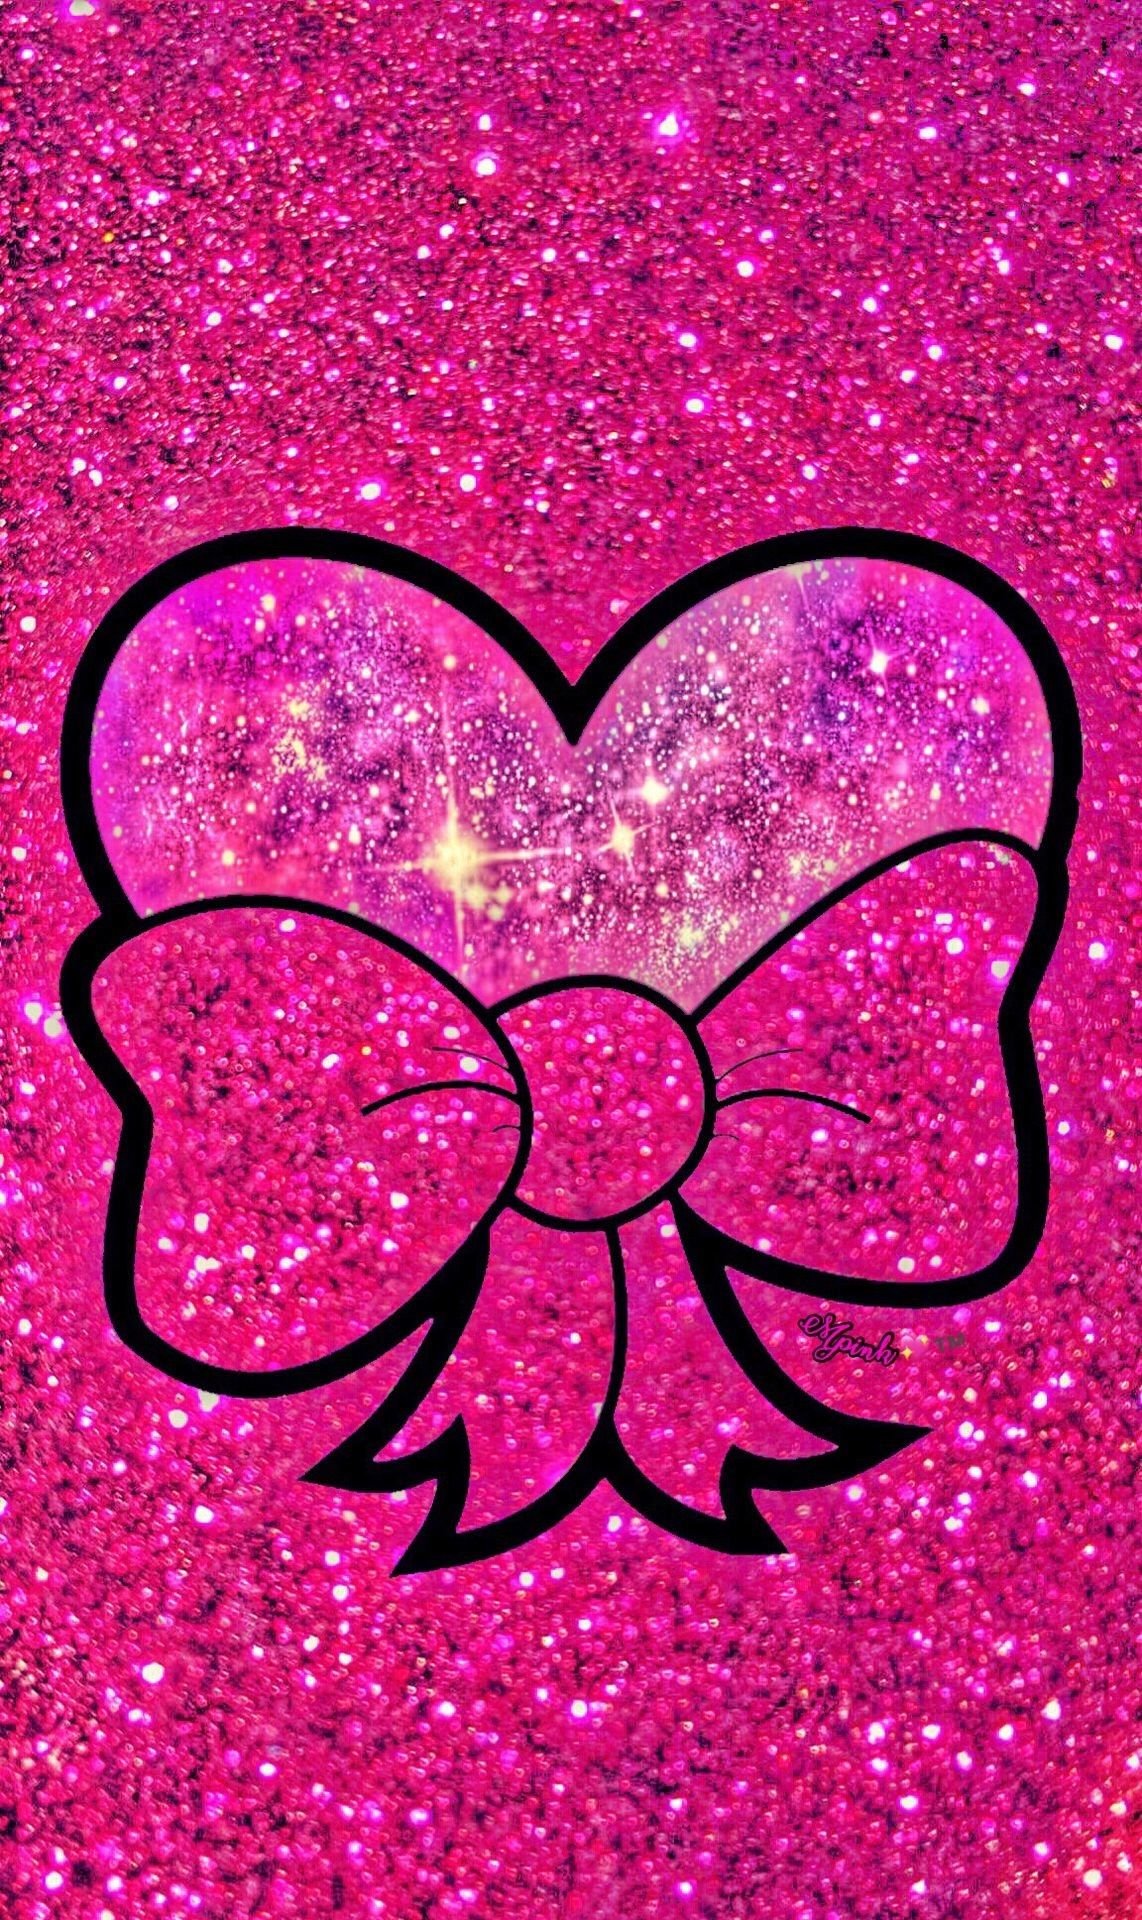 Download Brighten your day with Glitter Pink Hearts Wallpaper  Wallpapers com